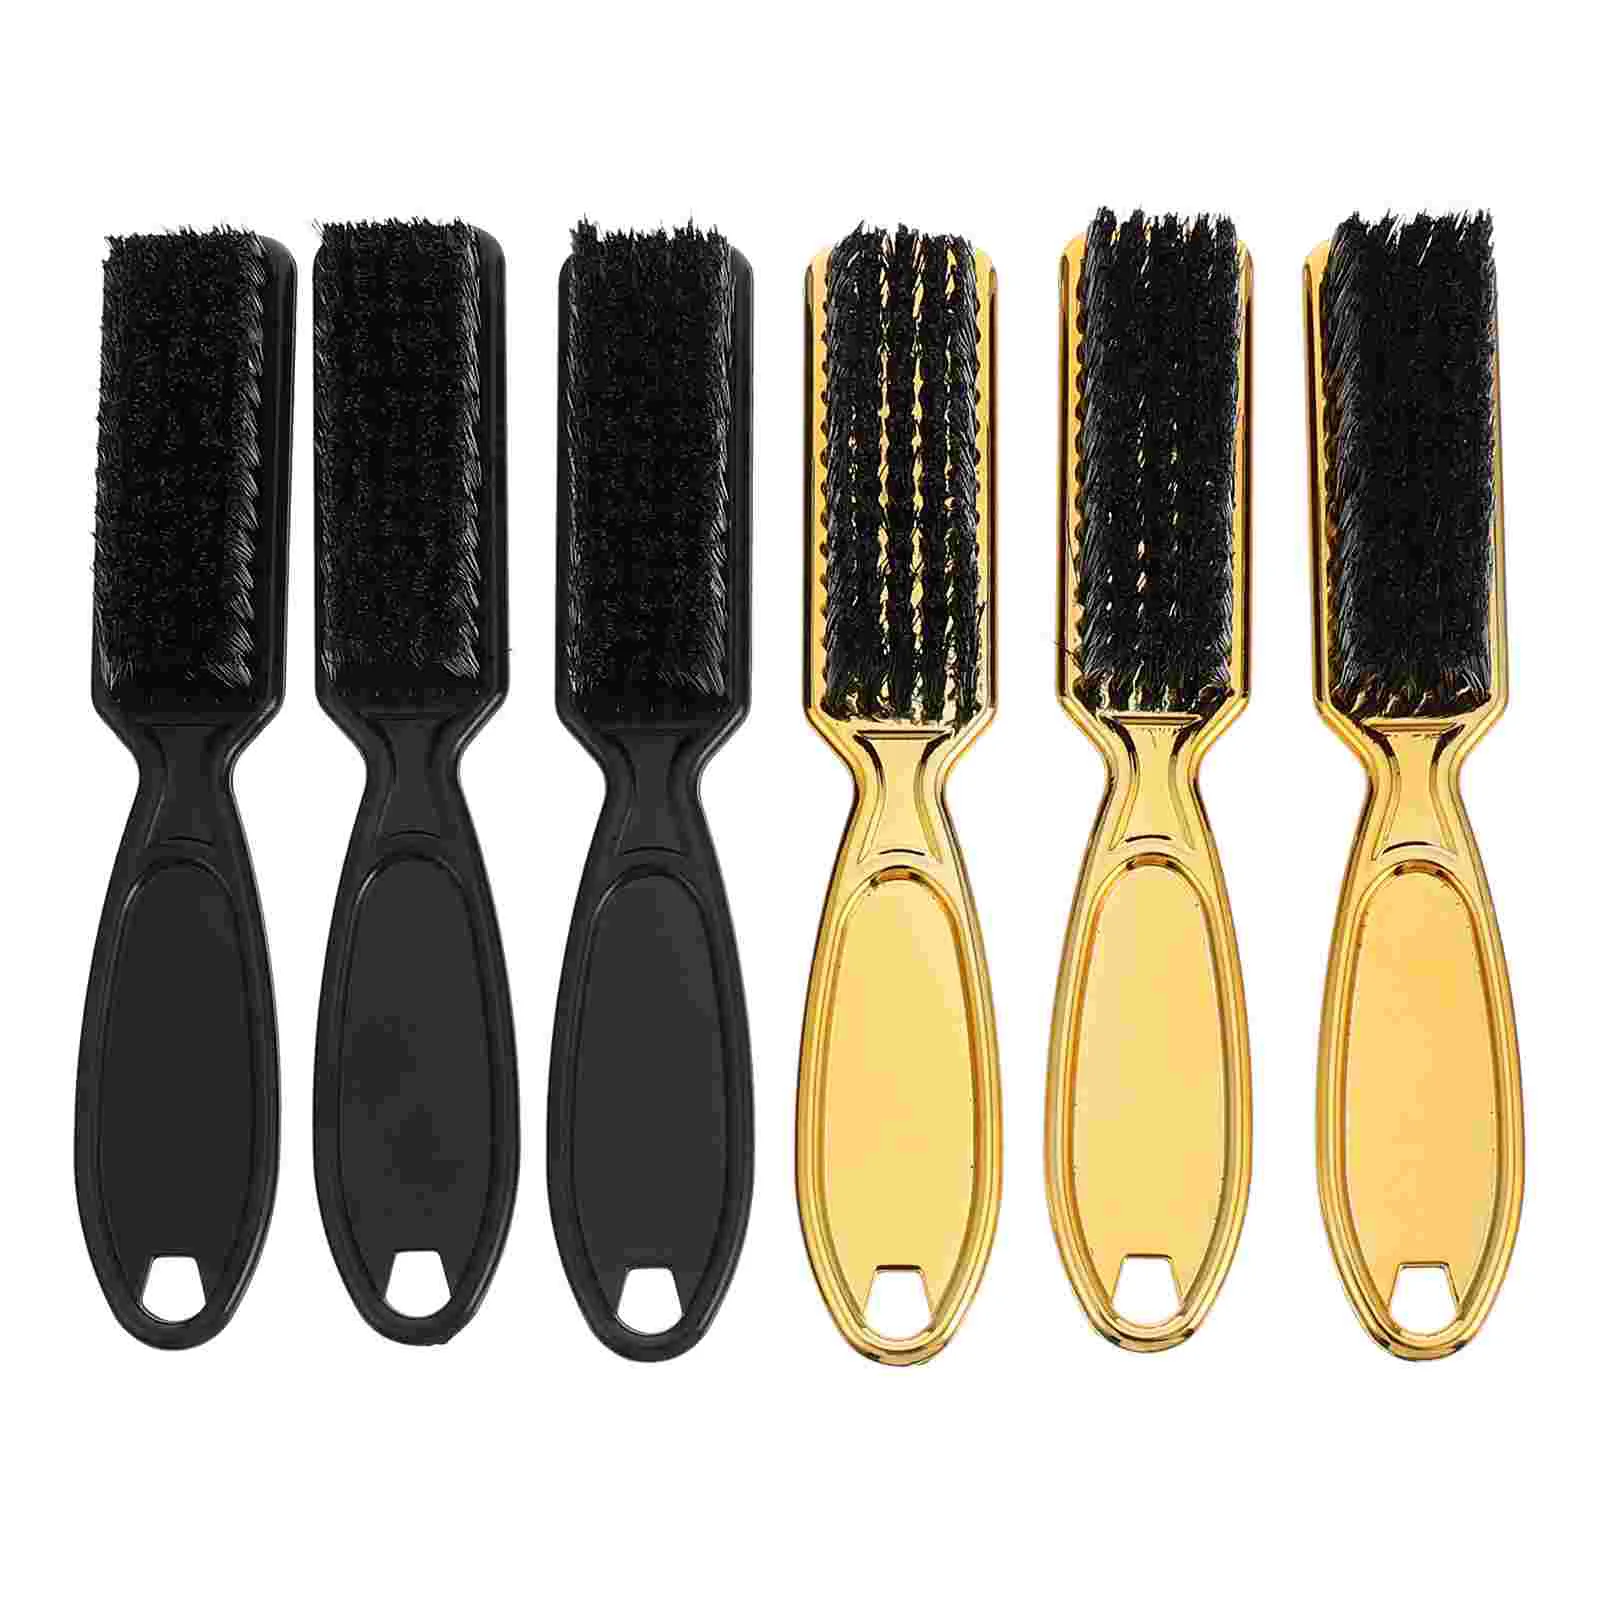 

Brush Hair Duster Cleaning Hairdressing Barber Broken Neck Comb Tool Salon Remove Clipper Hairstylingbarbers Cutting Supplies